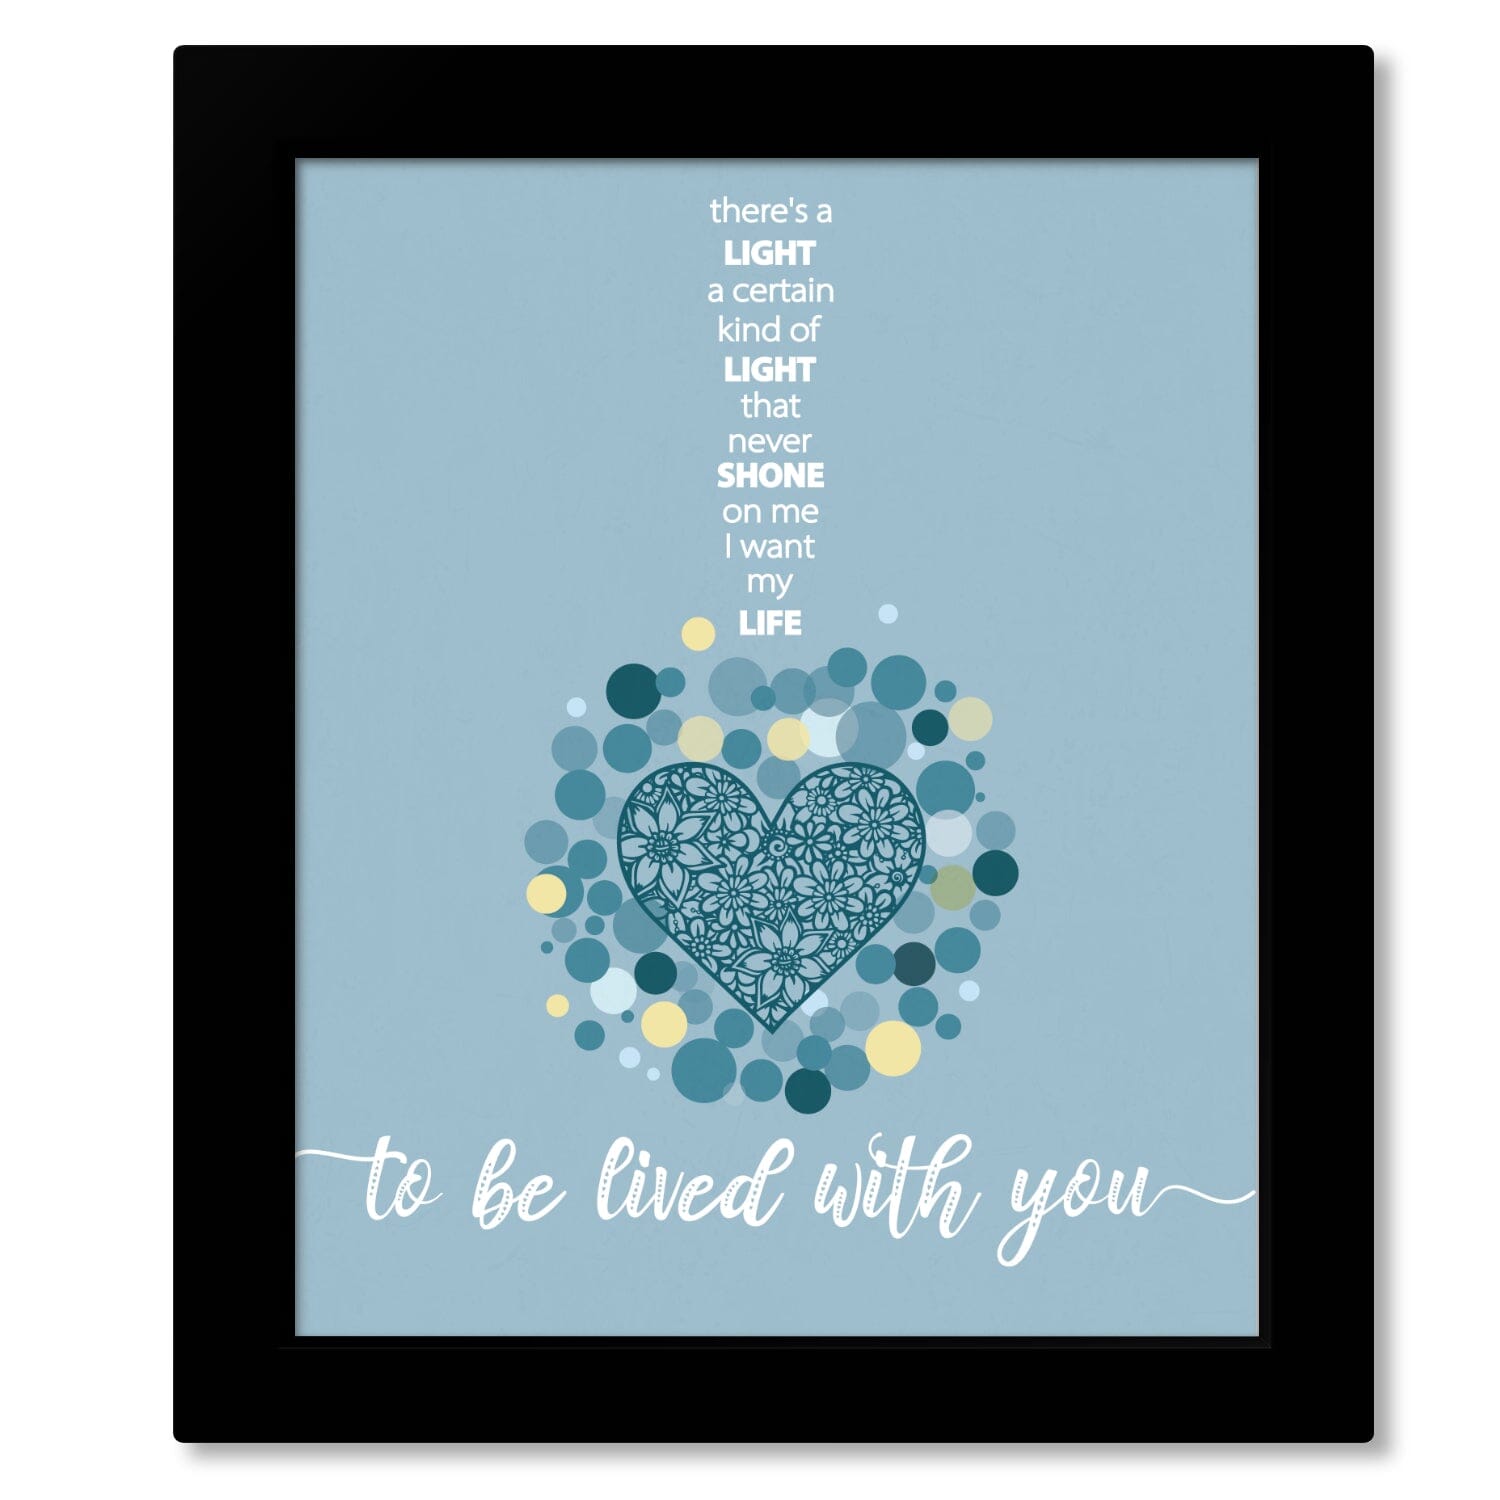 To Love Somebody by the Bee Gees - 60s Song Lyric Art Print Song Lyrics Art Song Lyrics Art 8x10 Framed Print 